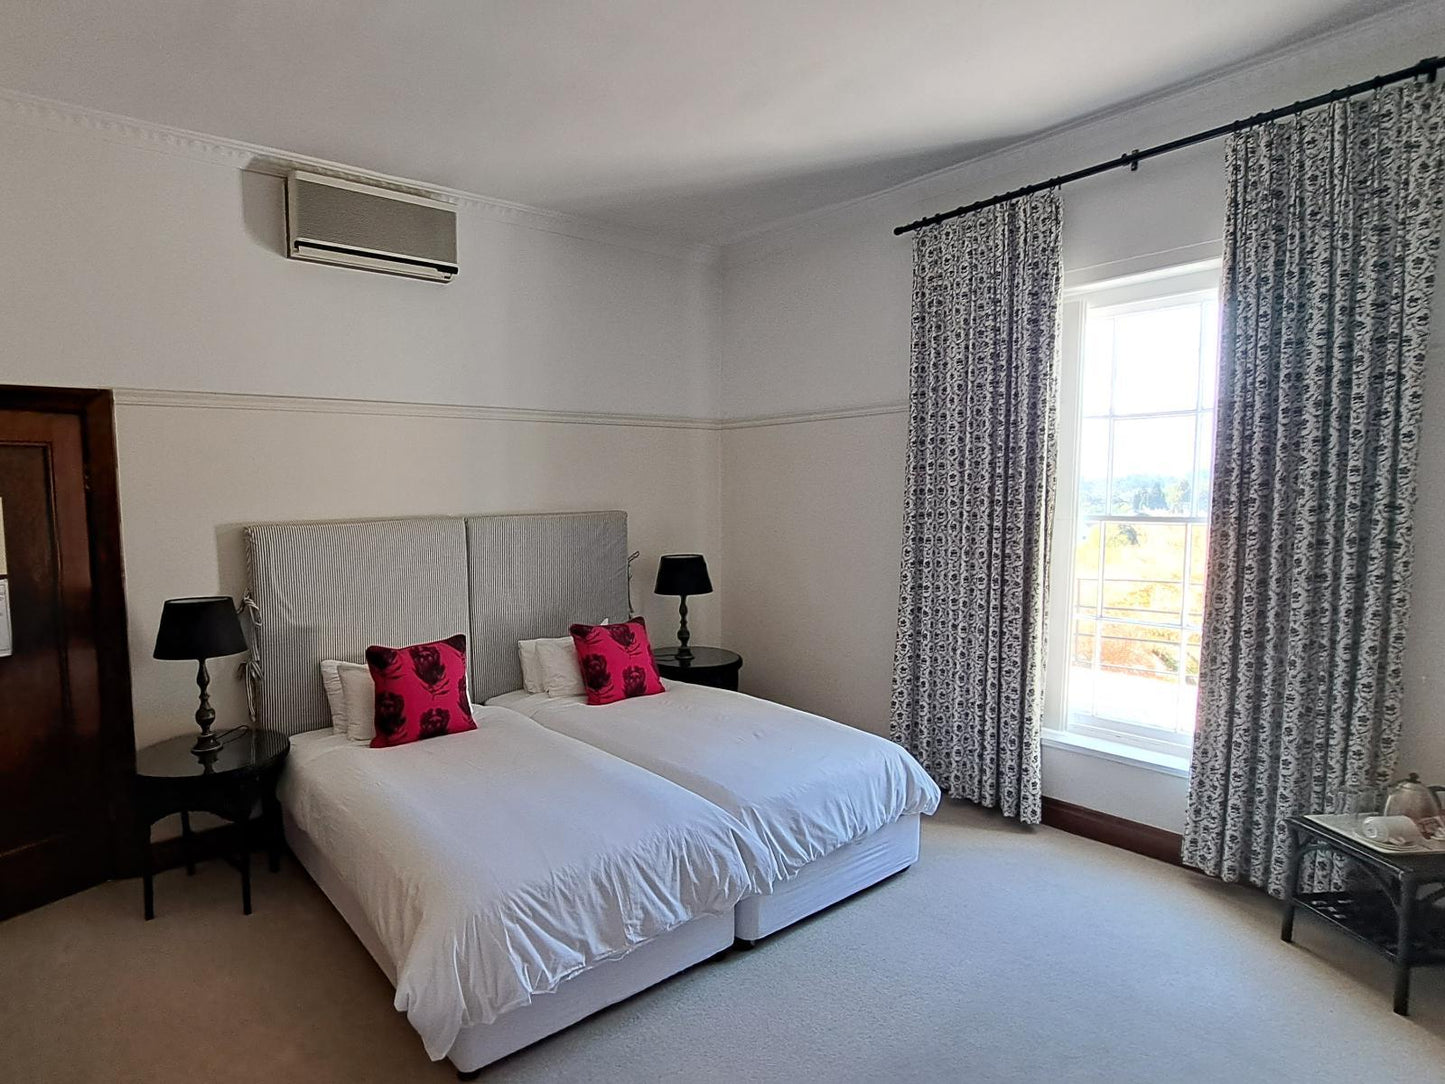 Van Ryns @ Zomerlust Boutique Hotel A Division Of Tjp Capital Holdings (Pty) Ltd